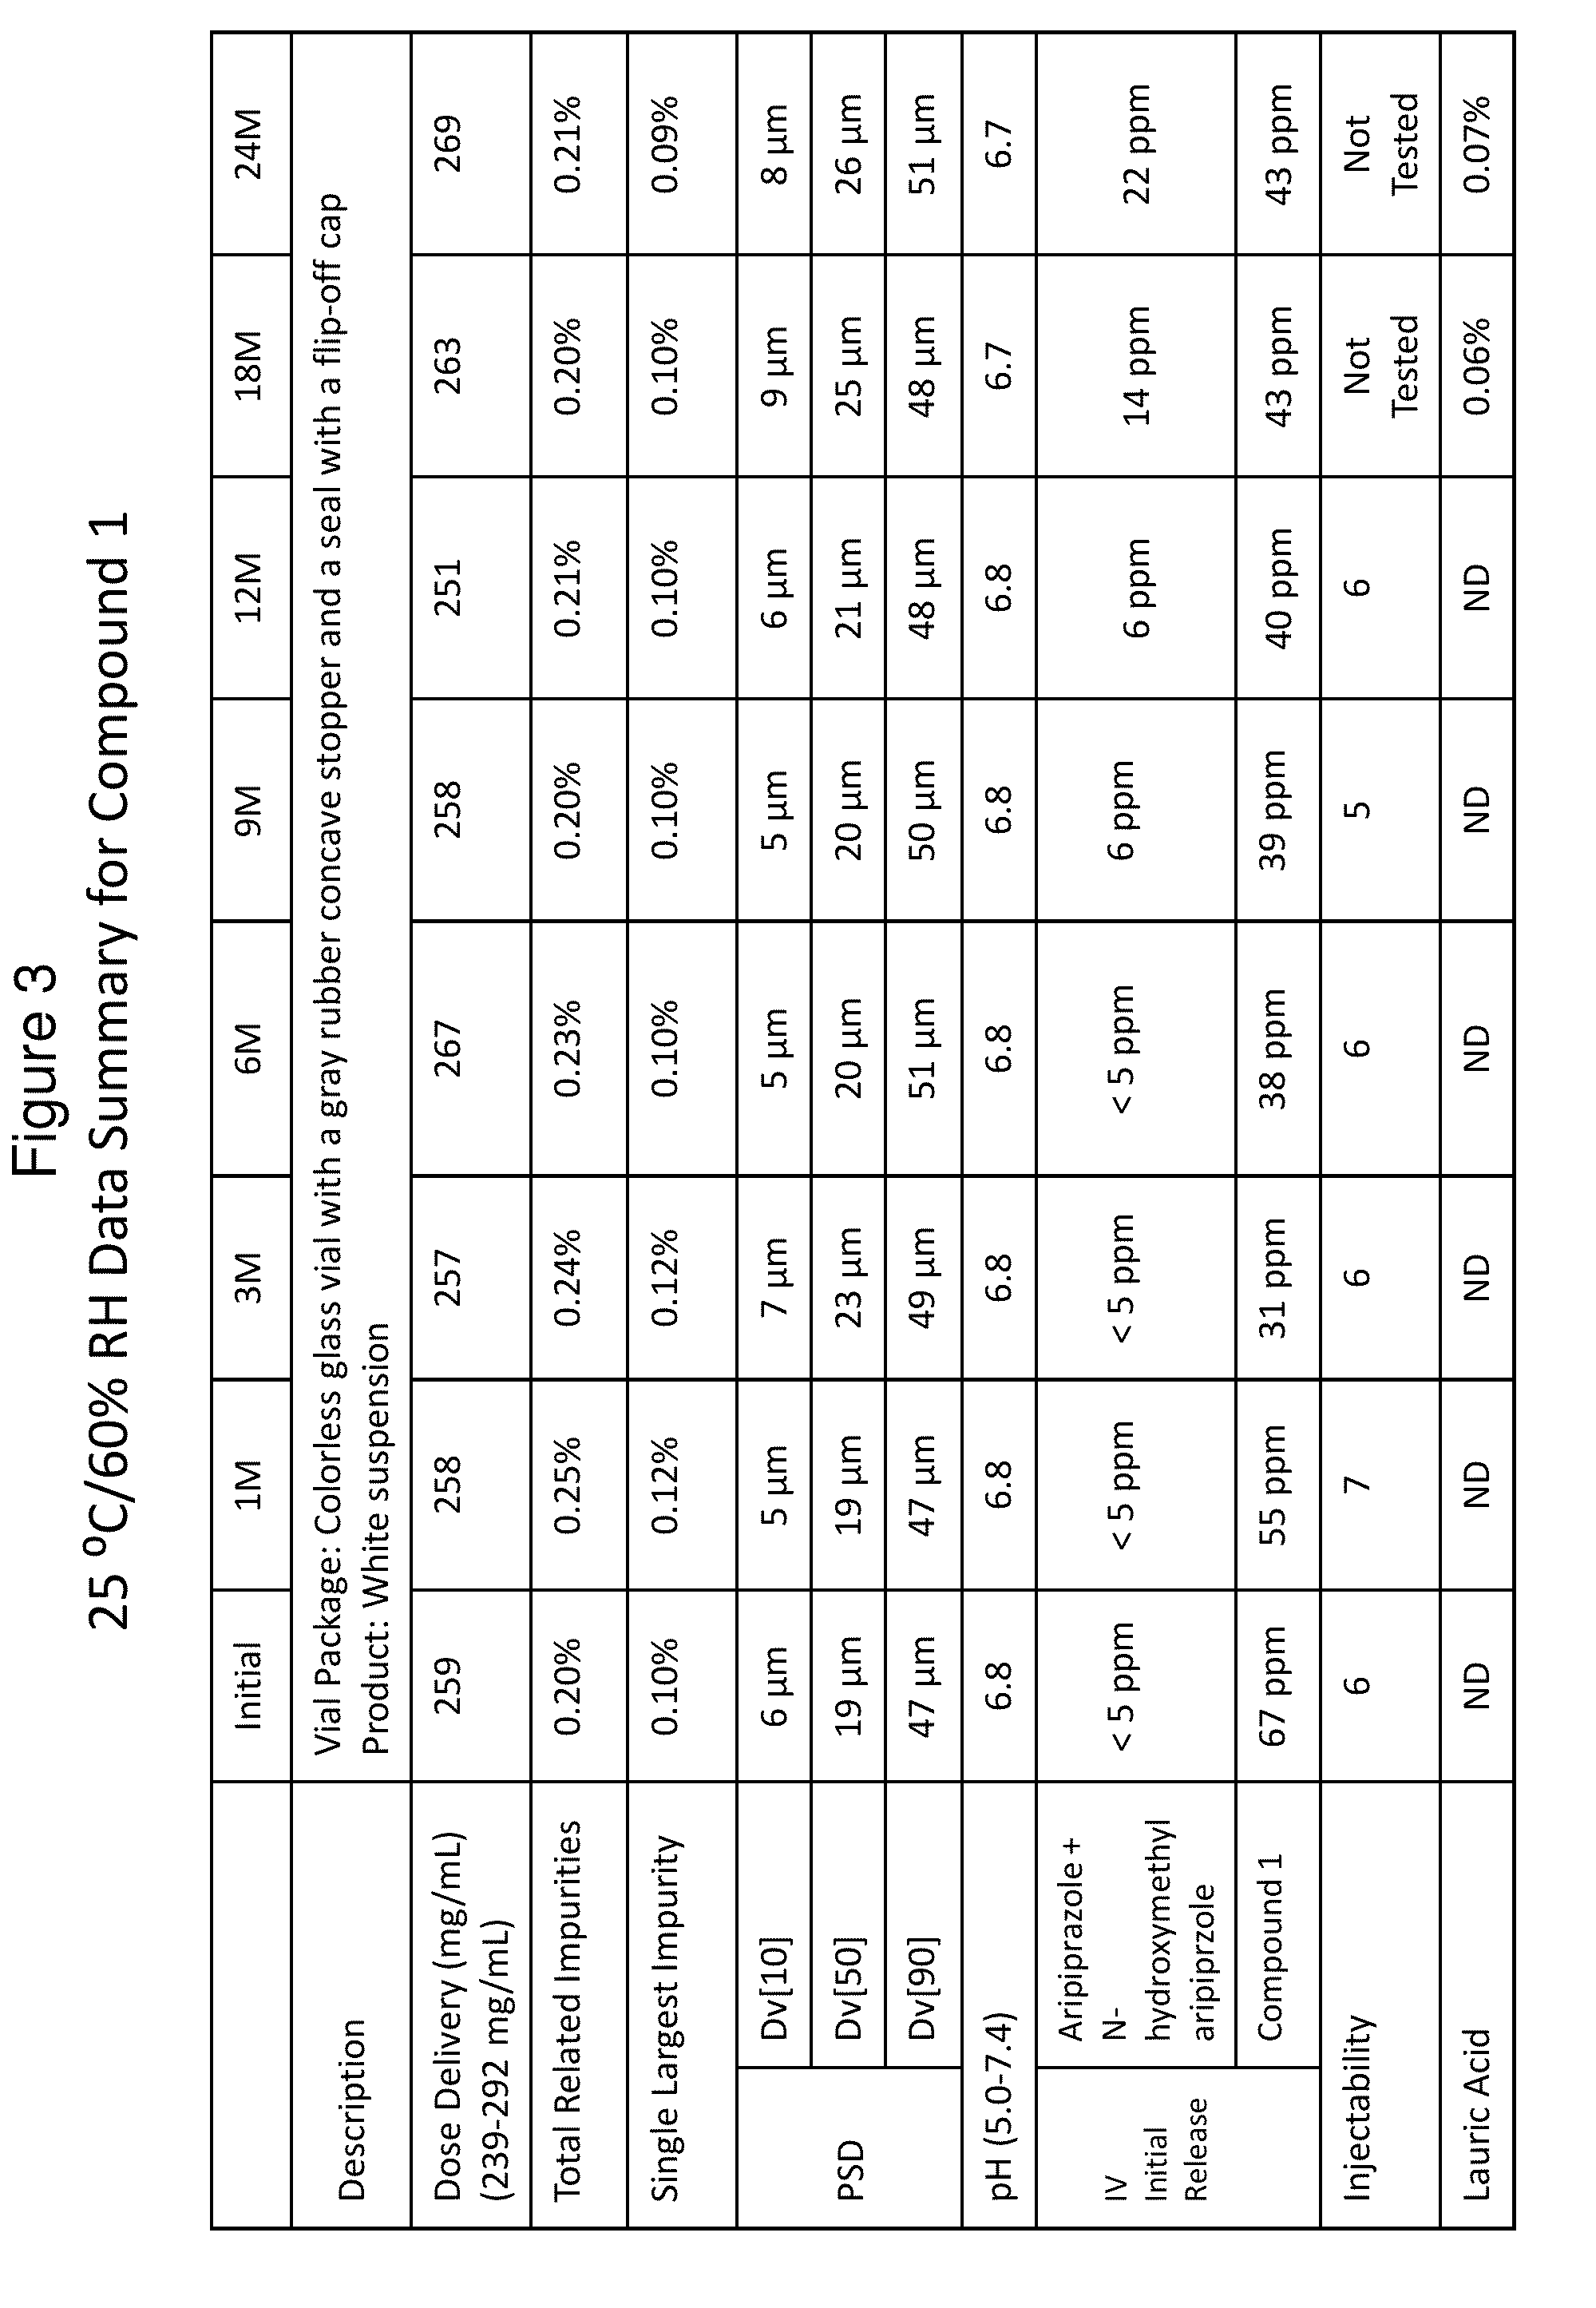 Pharmaceutical compositions having improved storage stability